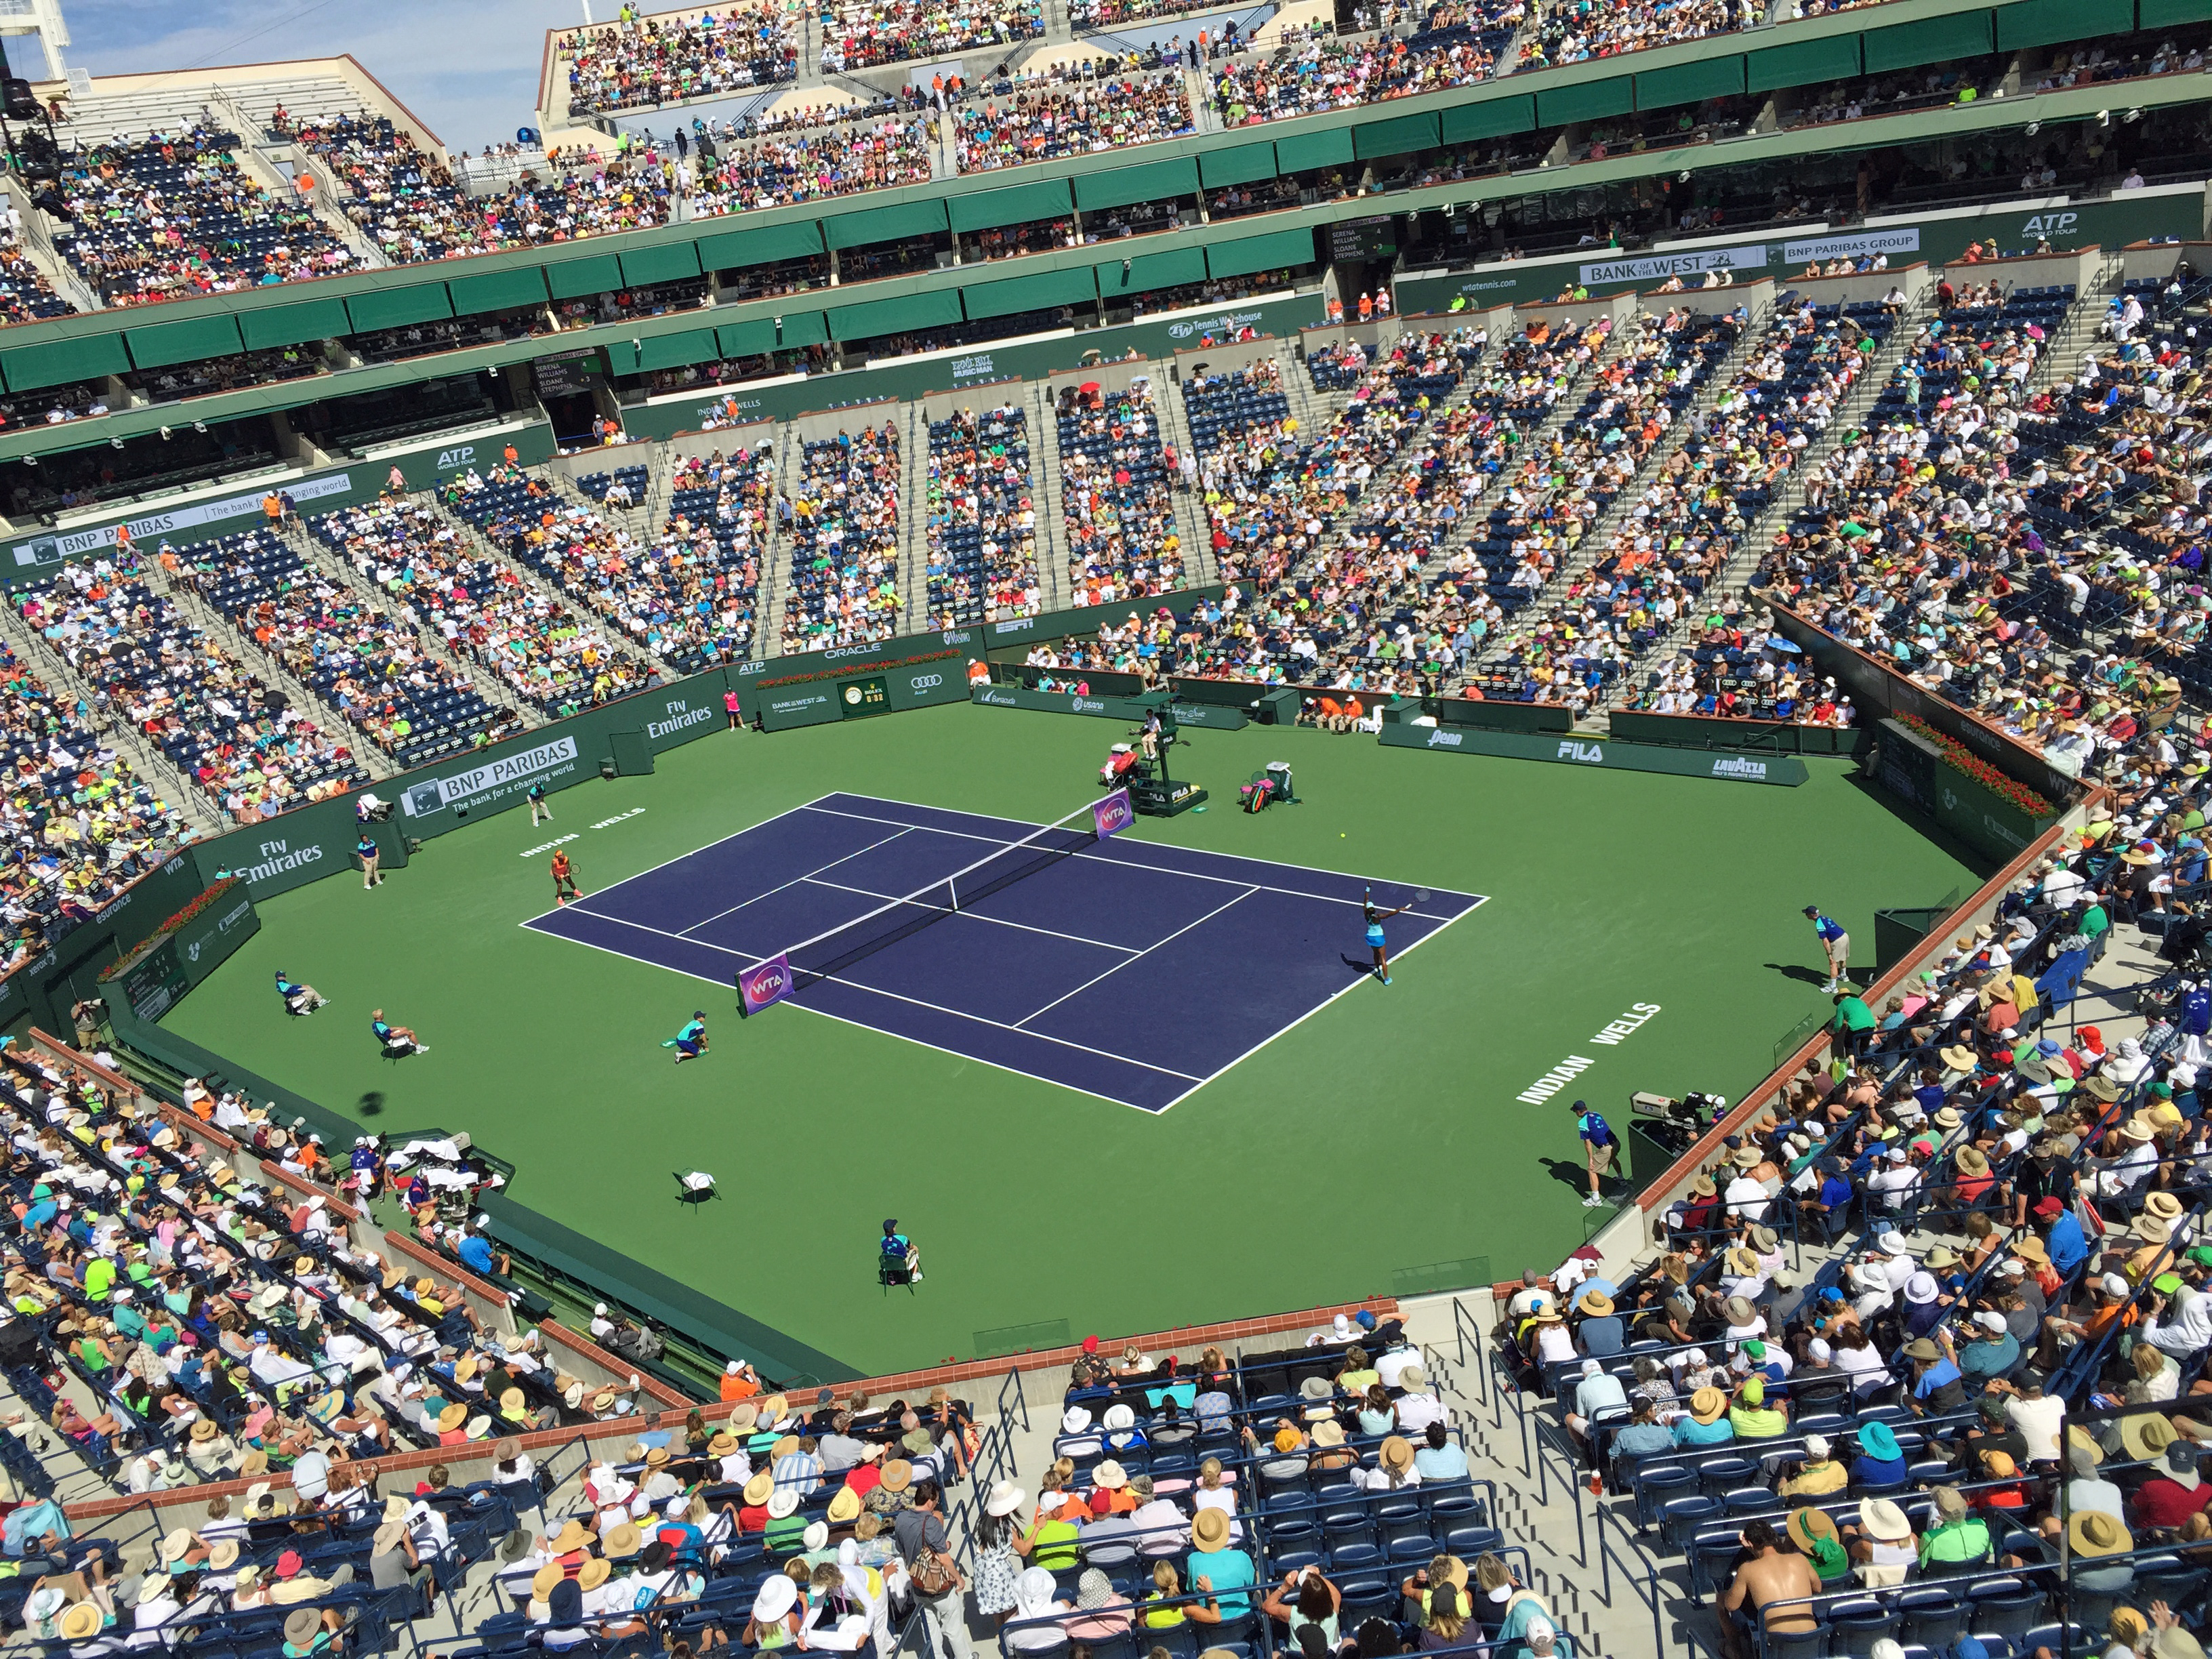 This year’s BNP Paribas Open featured the return of tennis star Serena Williams (left) following a 14-year absence.